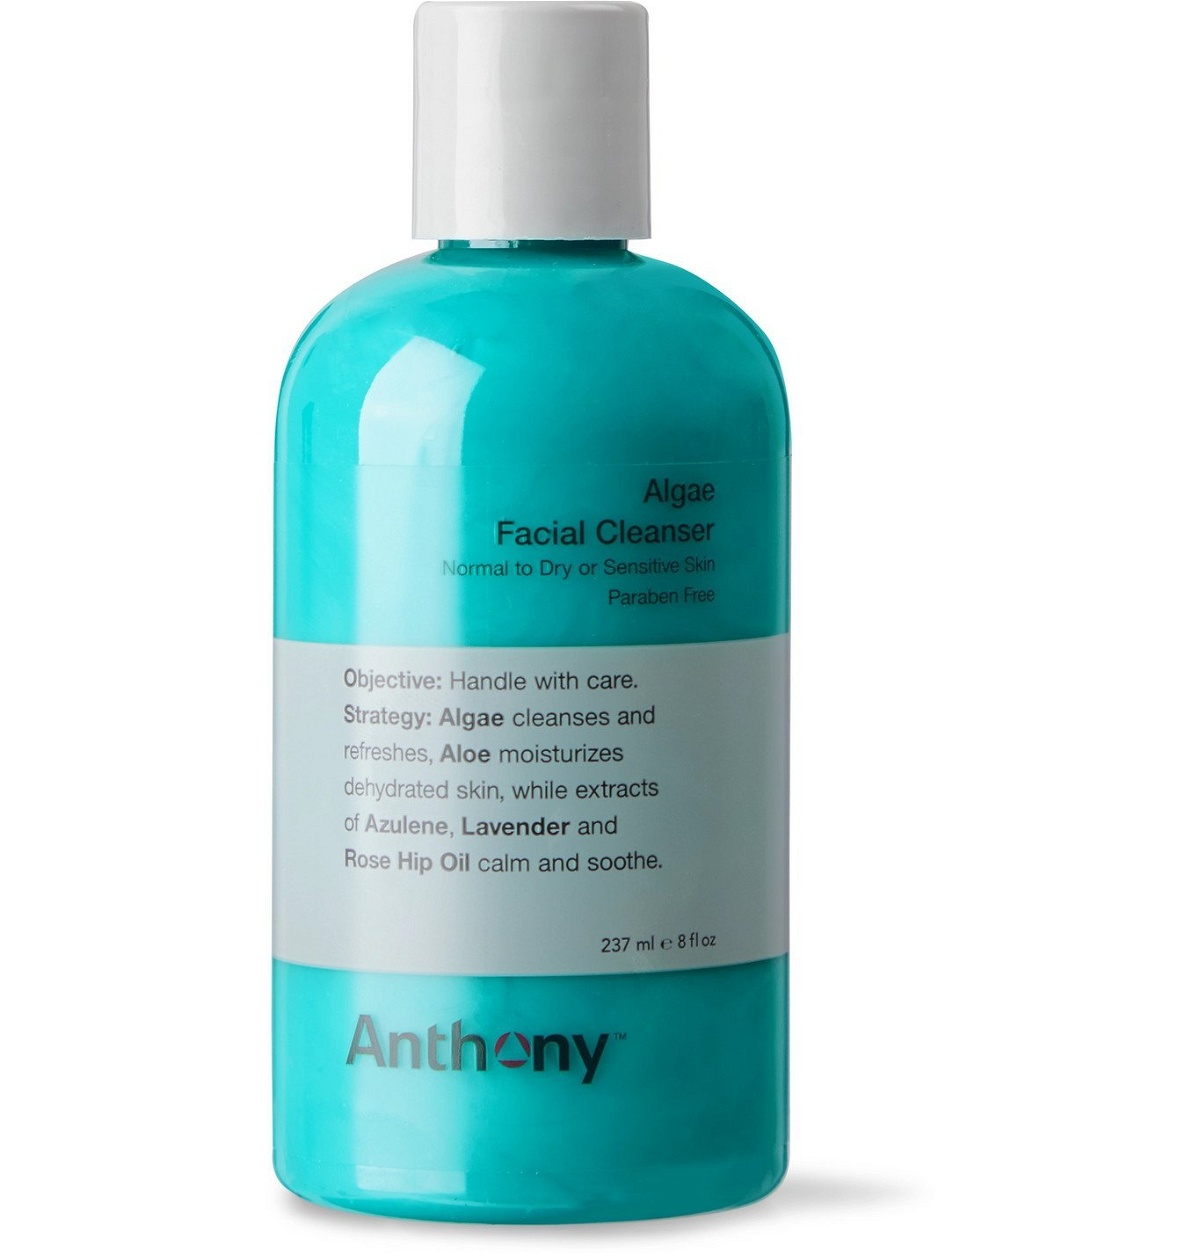 Photo: Anthony - Algae Facial Cleanser, 237ml - Colorless